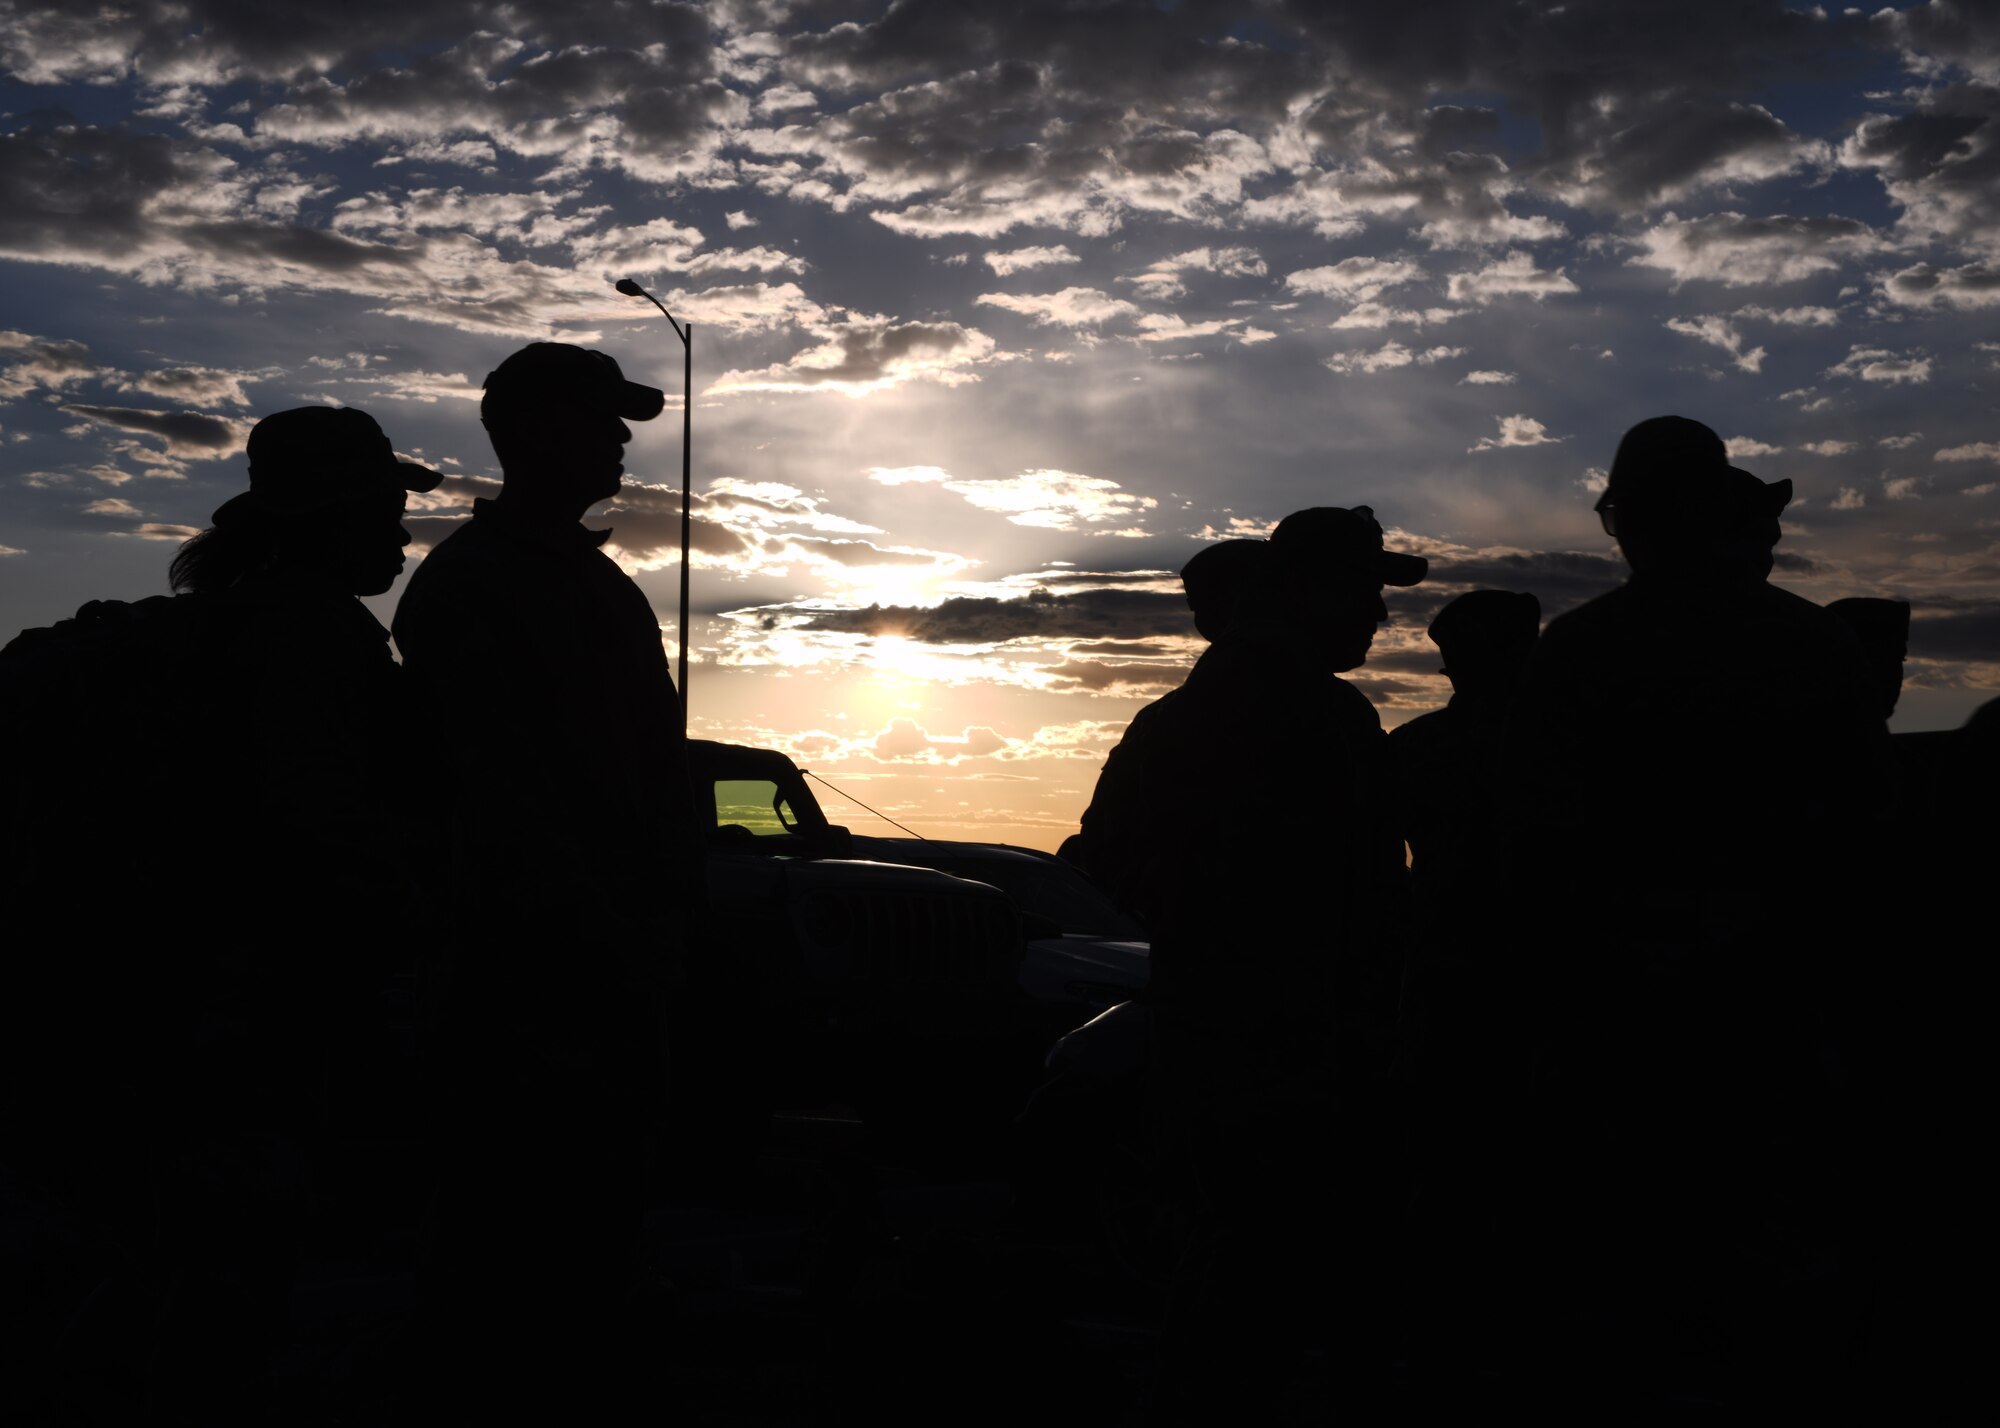 Members with the 90th Security Forces Group get their equipment ready to take on the Crow Creek Challenge, July 8th, 2022, at F.E. Warren Air Force Base, Wyo. The crow creek challenge pushed Airmen to test their physical and mental readiness. (U.S. Photo by Senior Airman Darius Frazier.)